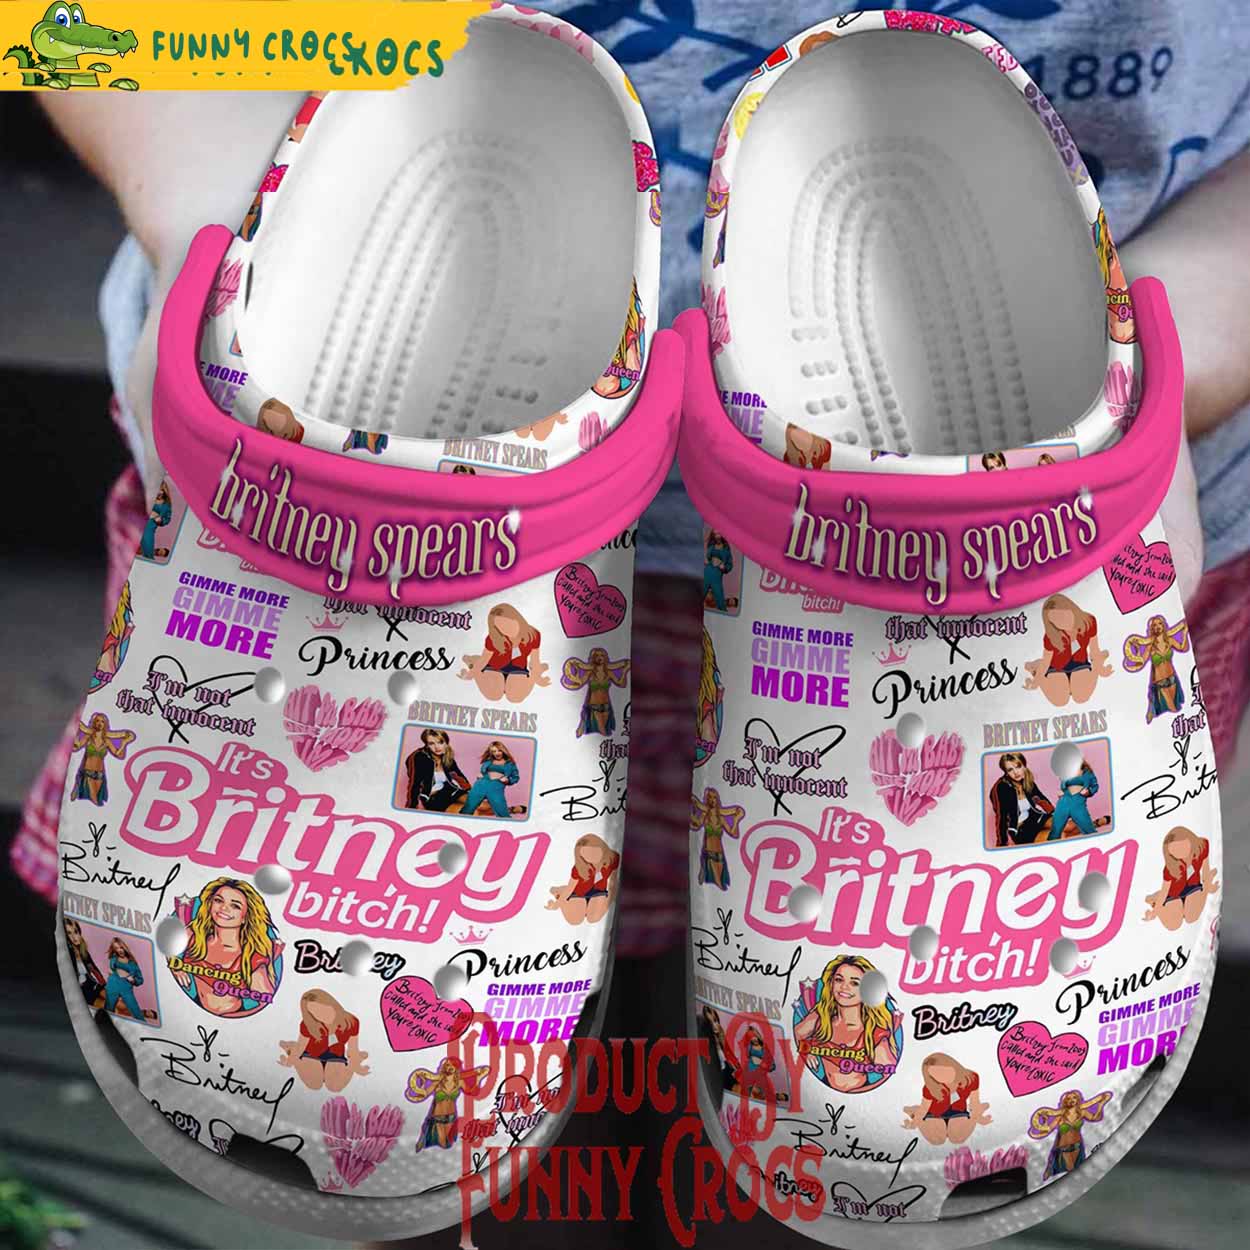 Britney Spears Gimme More Crocs Clog - Discover Comfort And Style Clog ...